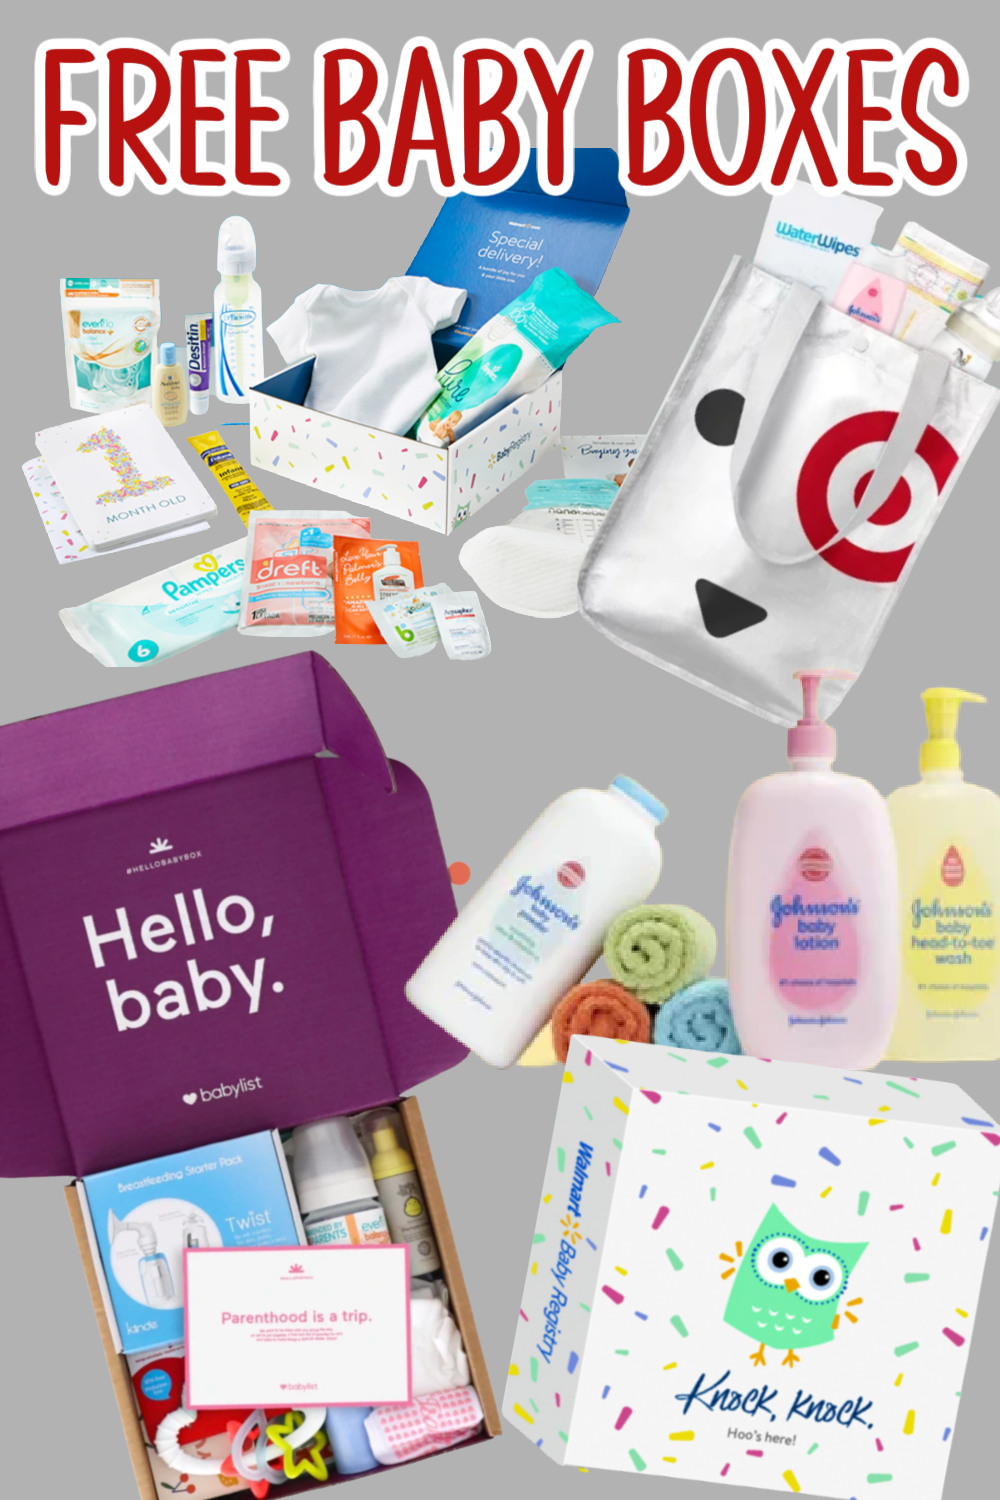 Free baby product trials